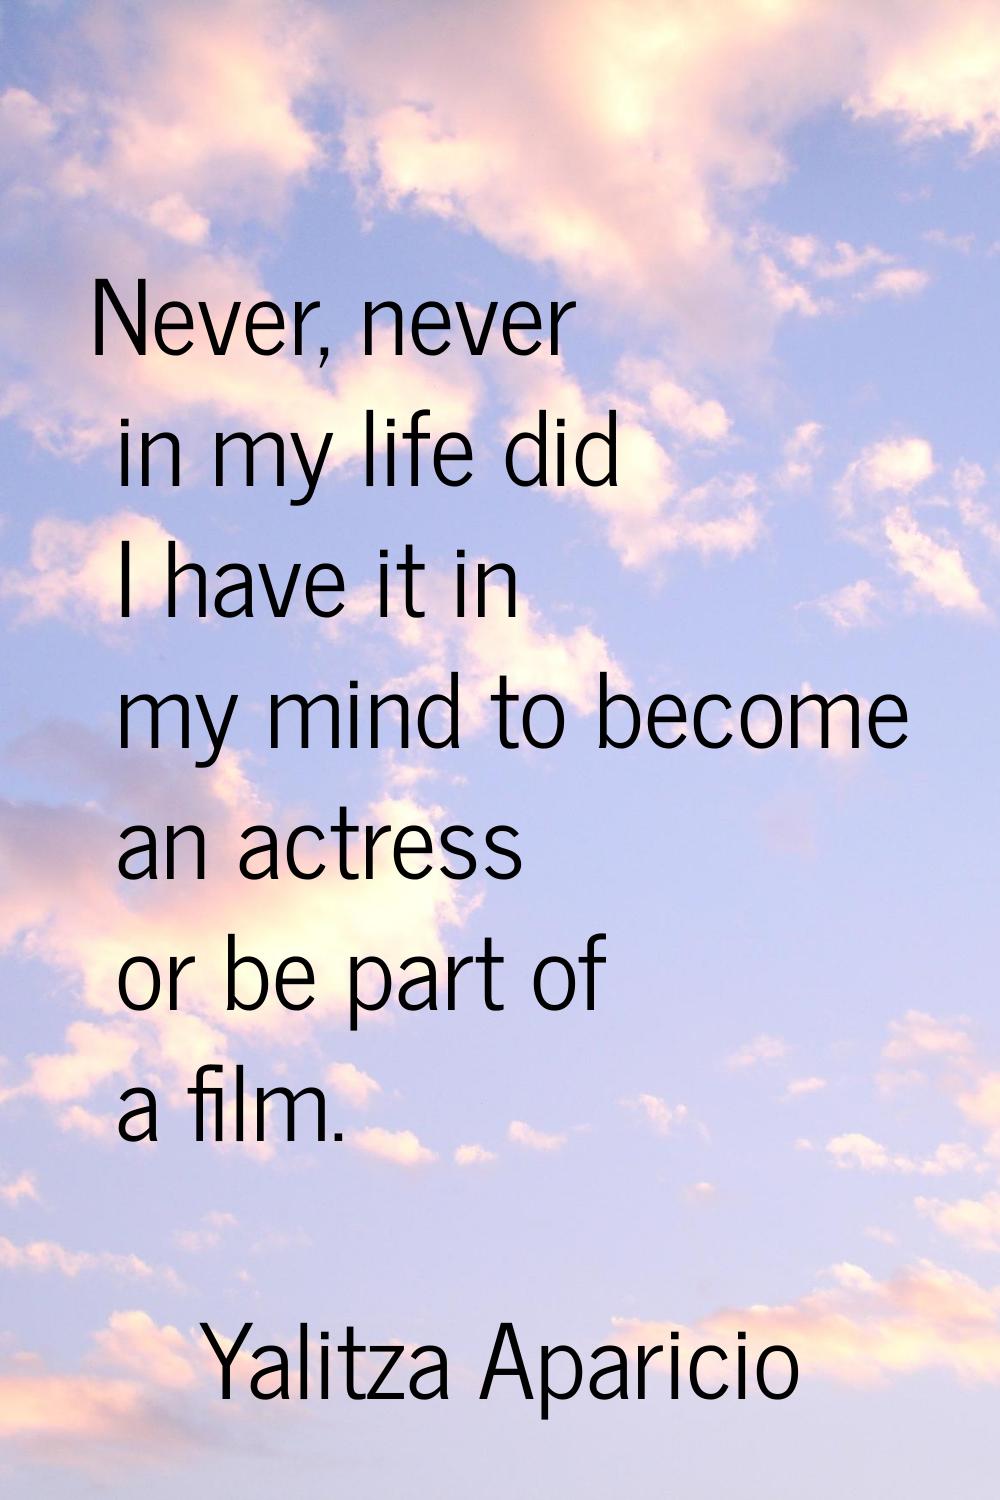 Never, never in my life did I have it in my mind to become an actress or be part of a film.